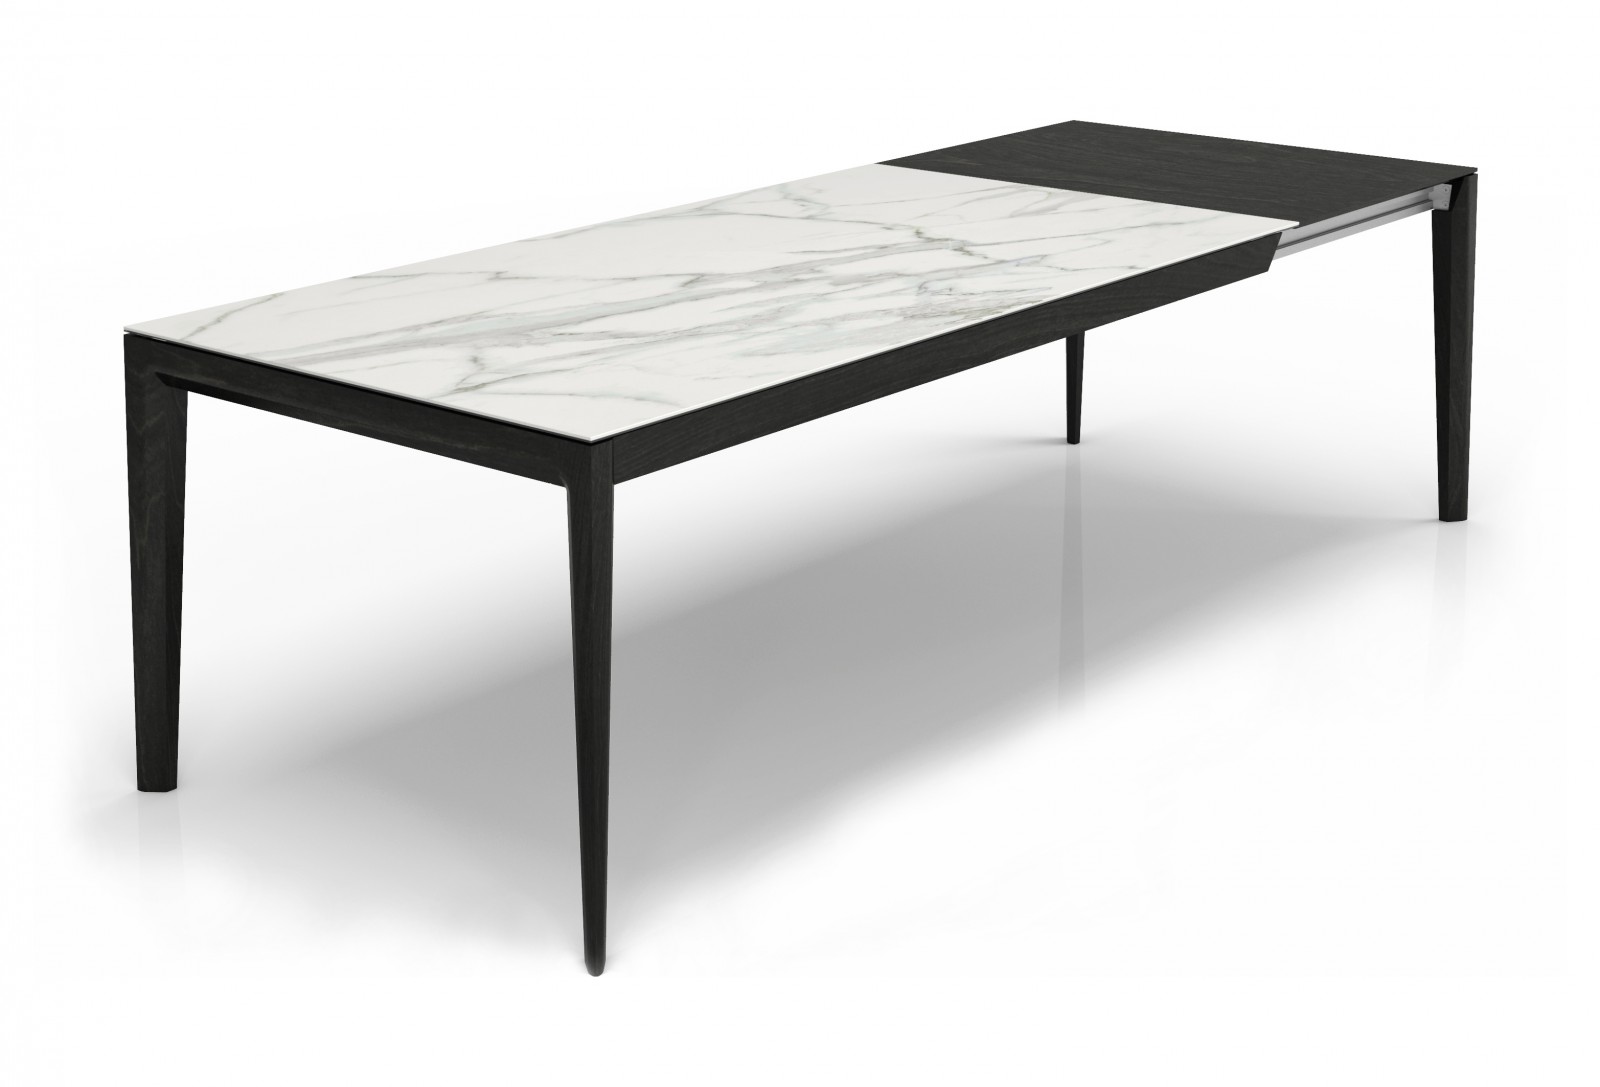 76" Ceramic top extension table